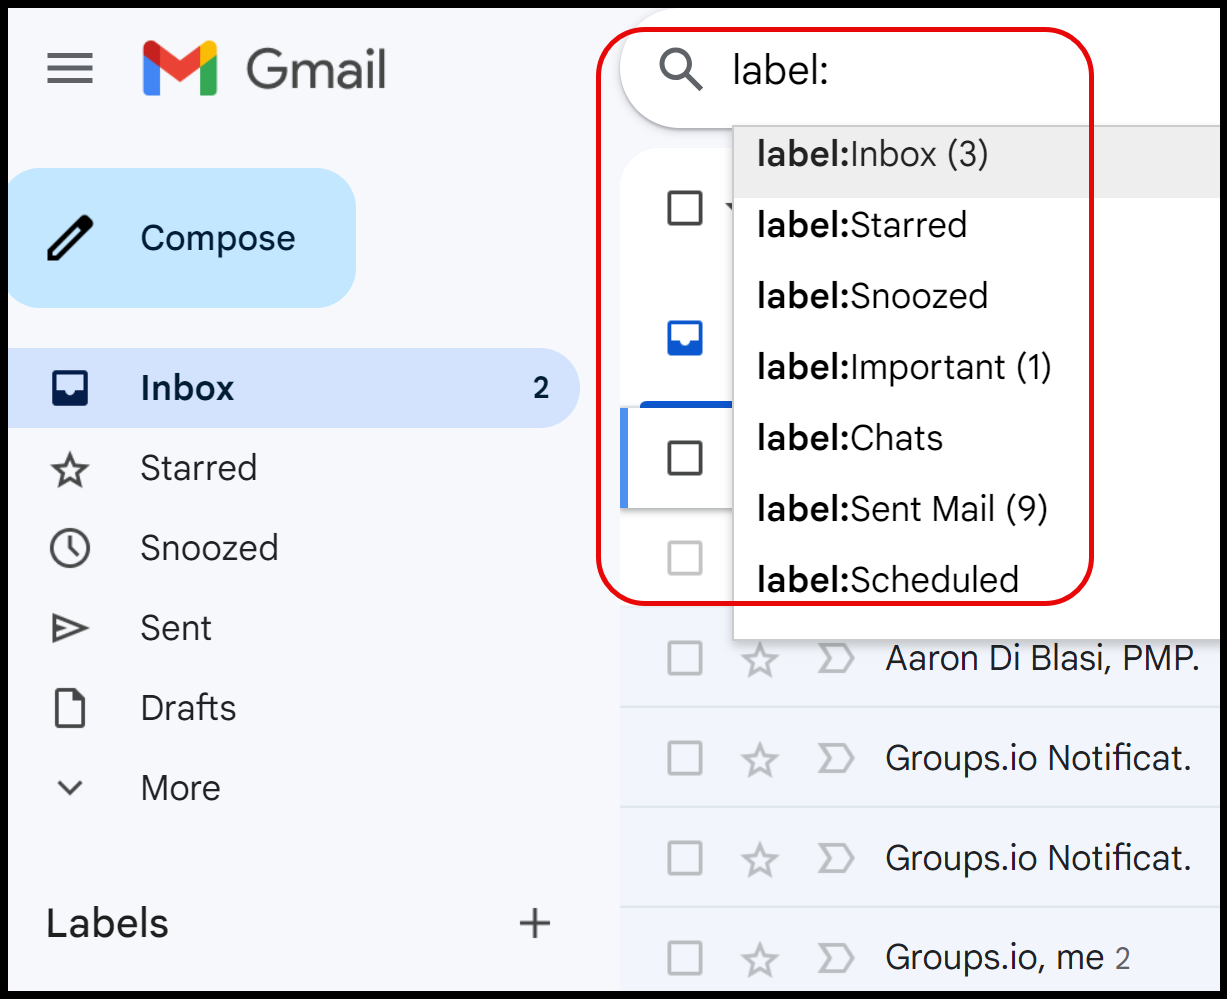 The 'Go to label' list open from the Search edit box showing system labels such as Inbox, Starred, Snoozed, etc.